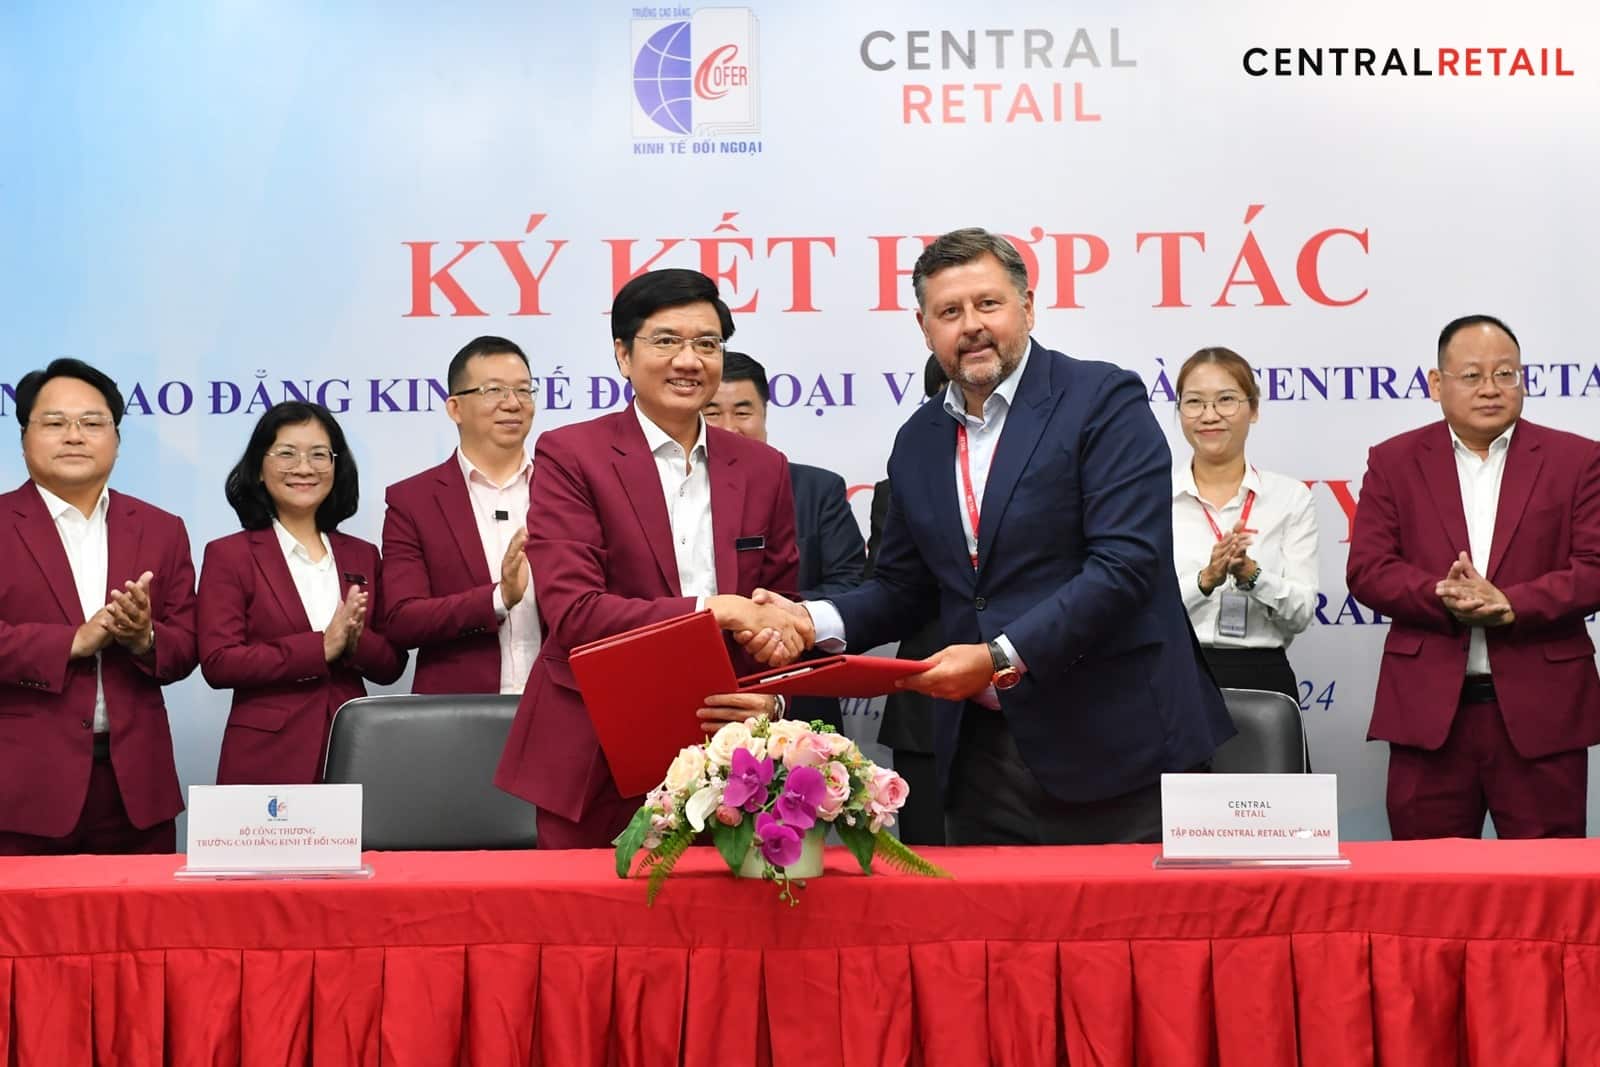 Central Retail Vietnam Partners with College of Foreign Economic Relations (COFER) to Train Retail Workforce